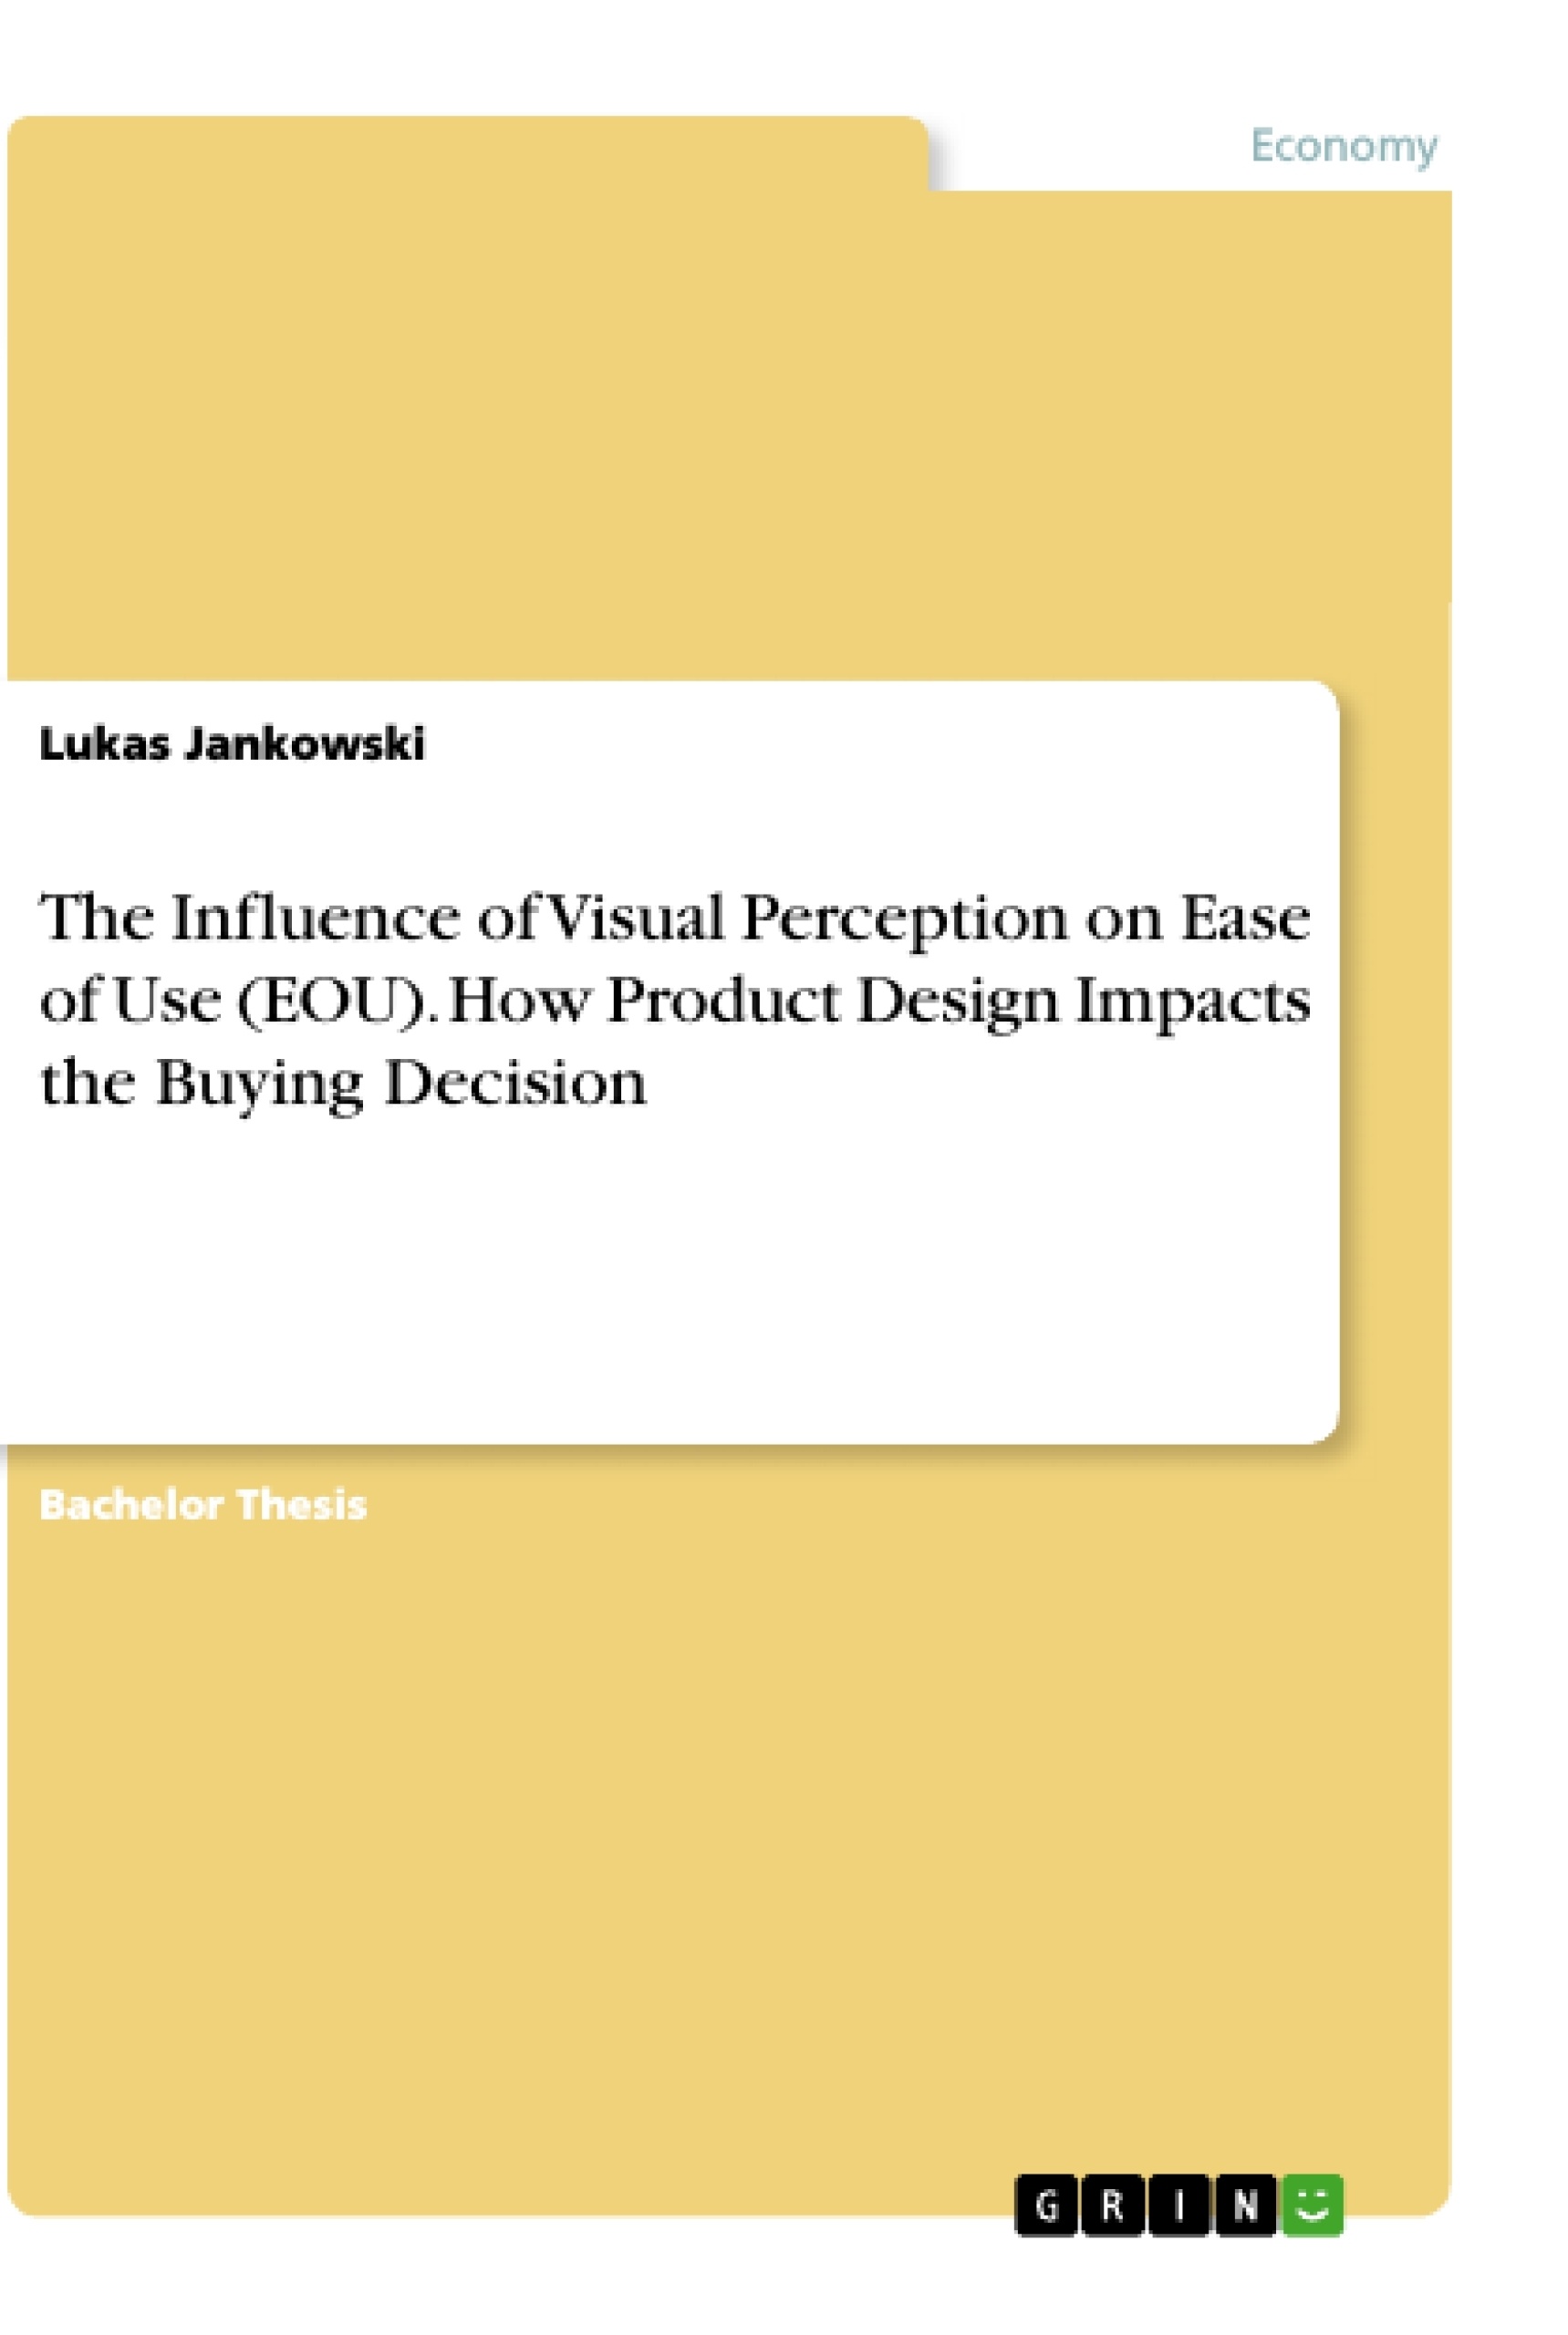 Titel: The Influence of Visual Perception on Ease of Use (EOU). How Product Design Impacts the Buying Decision